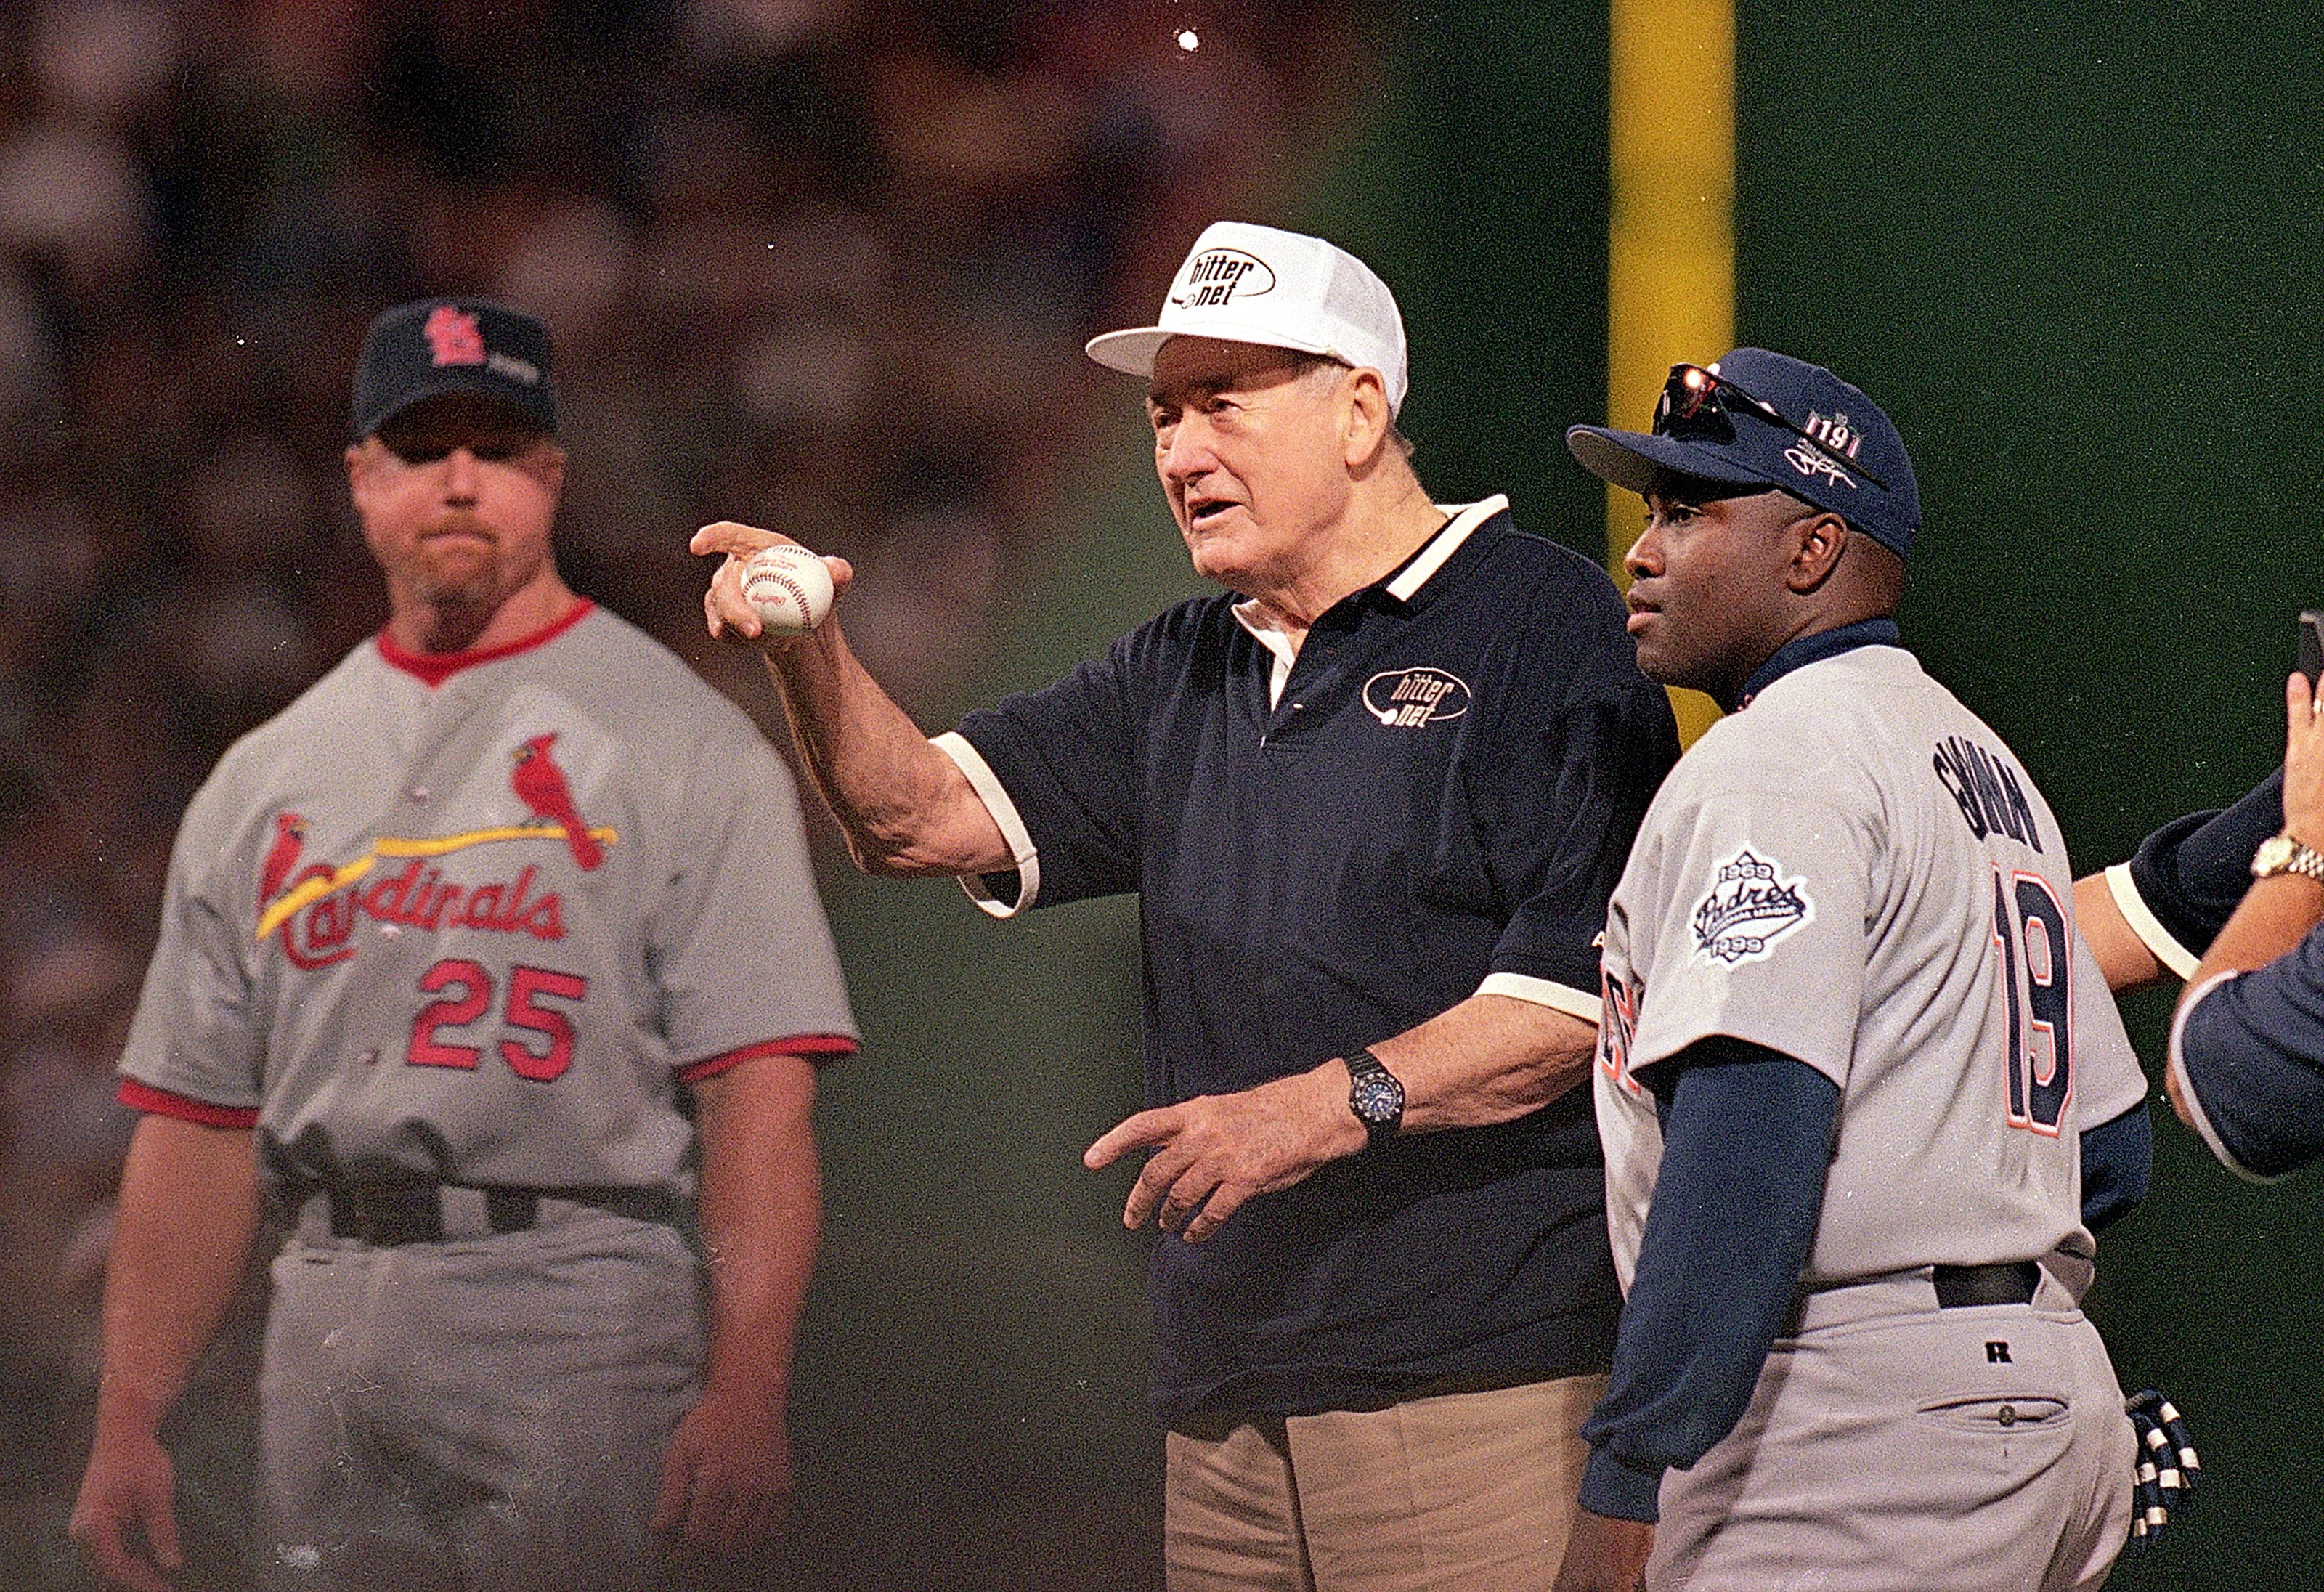 Ted Williams throws out the first pitch as he stands next to Tony Gwynn prior to  the 1999 MLB All-Star Game at Fenway Park. (Credit: Brian Bahr /Allsport)